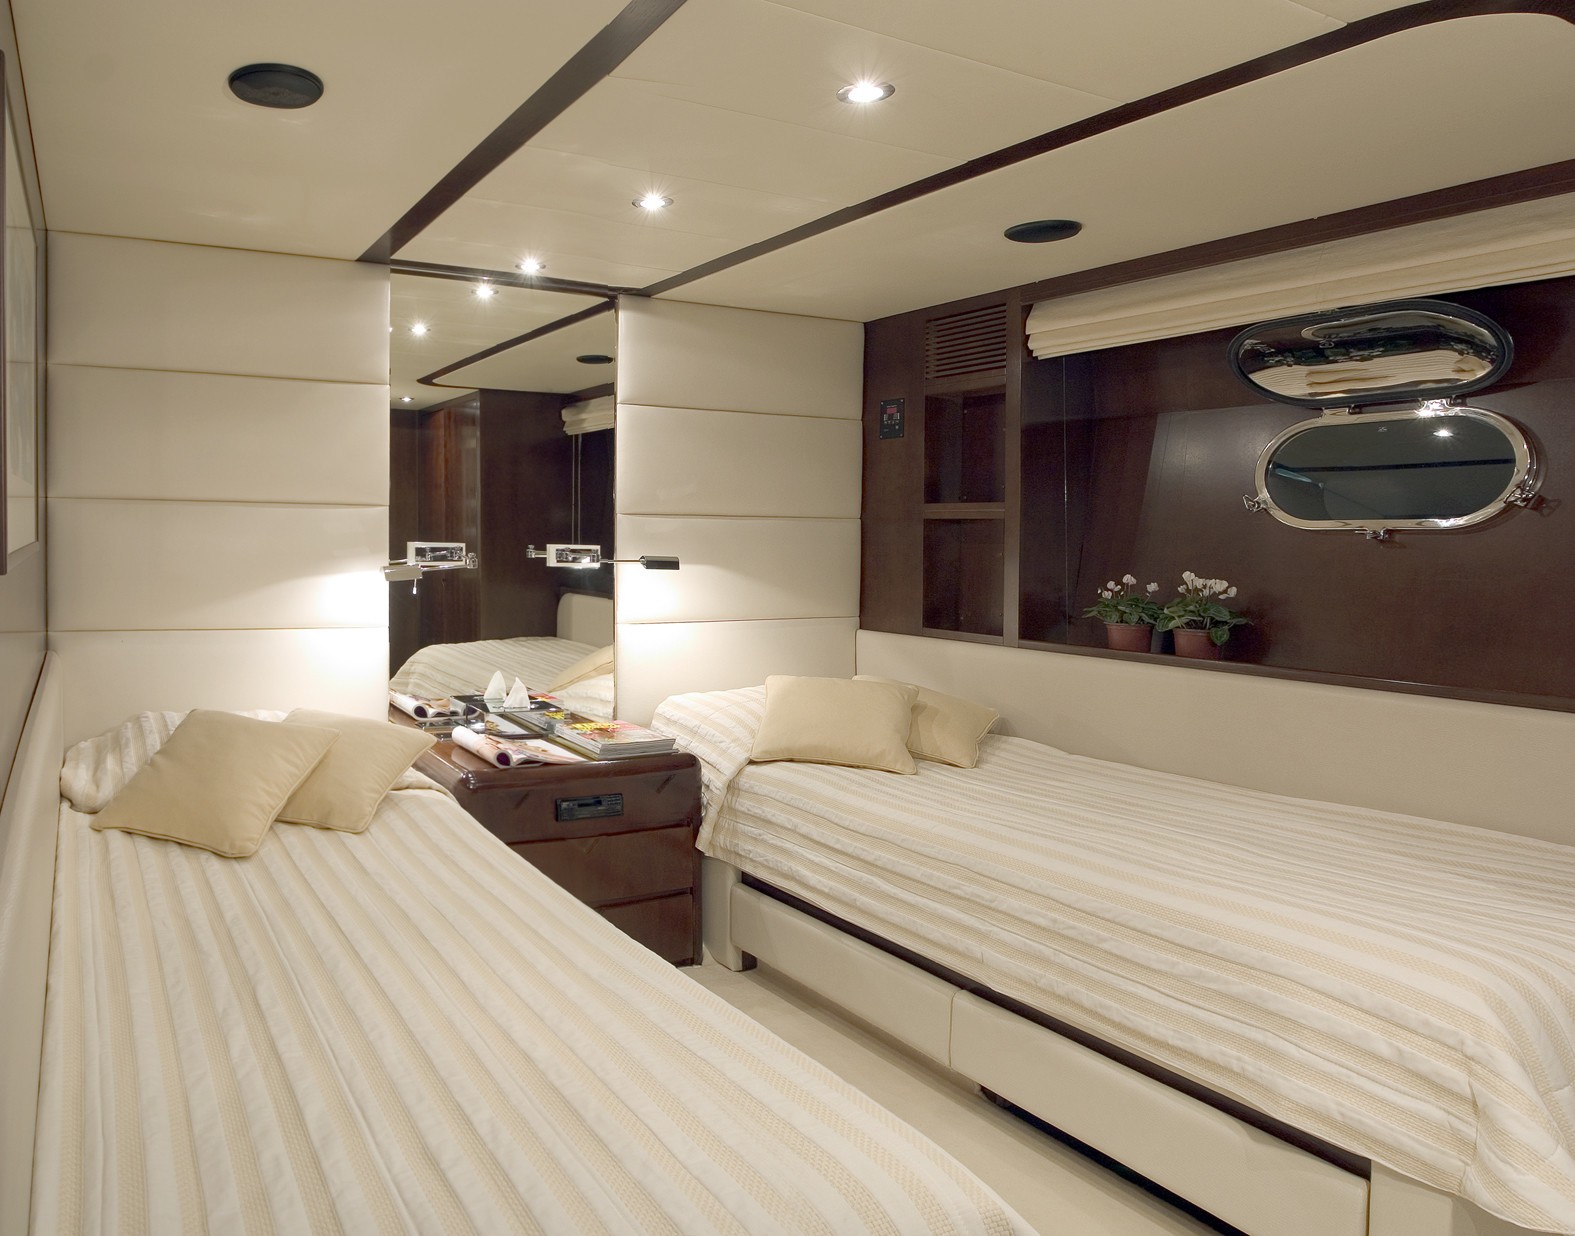 Yacht Yacht charter LET IT BE 35m - photo 11 of 20